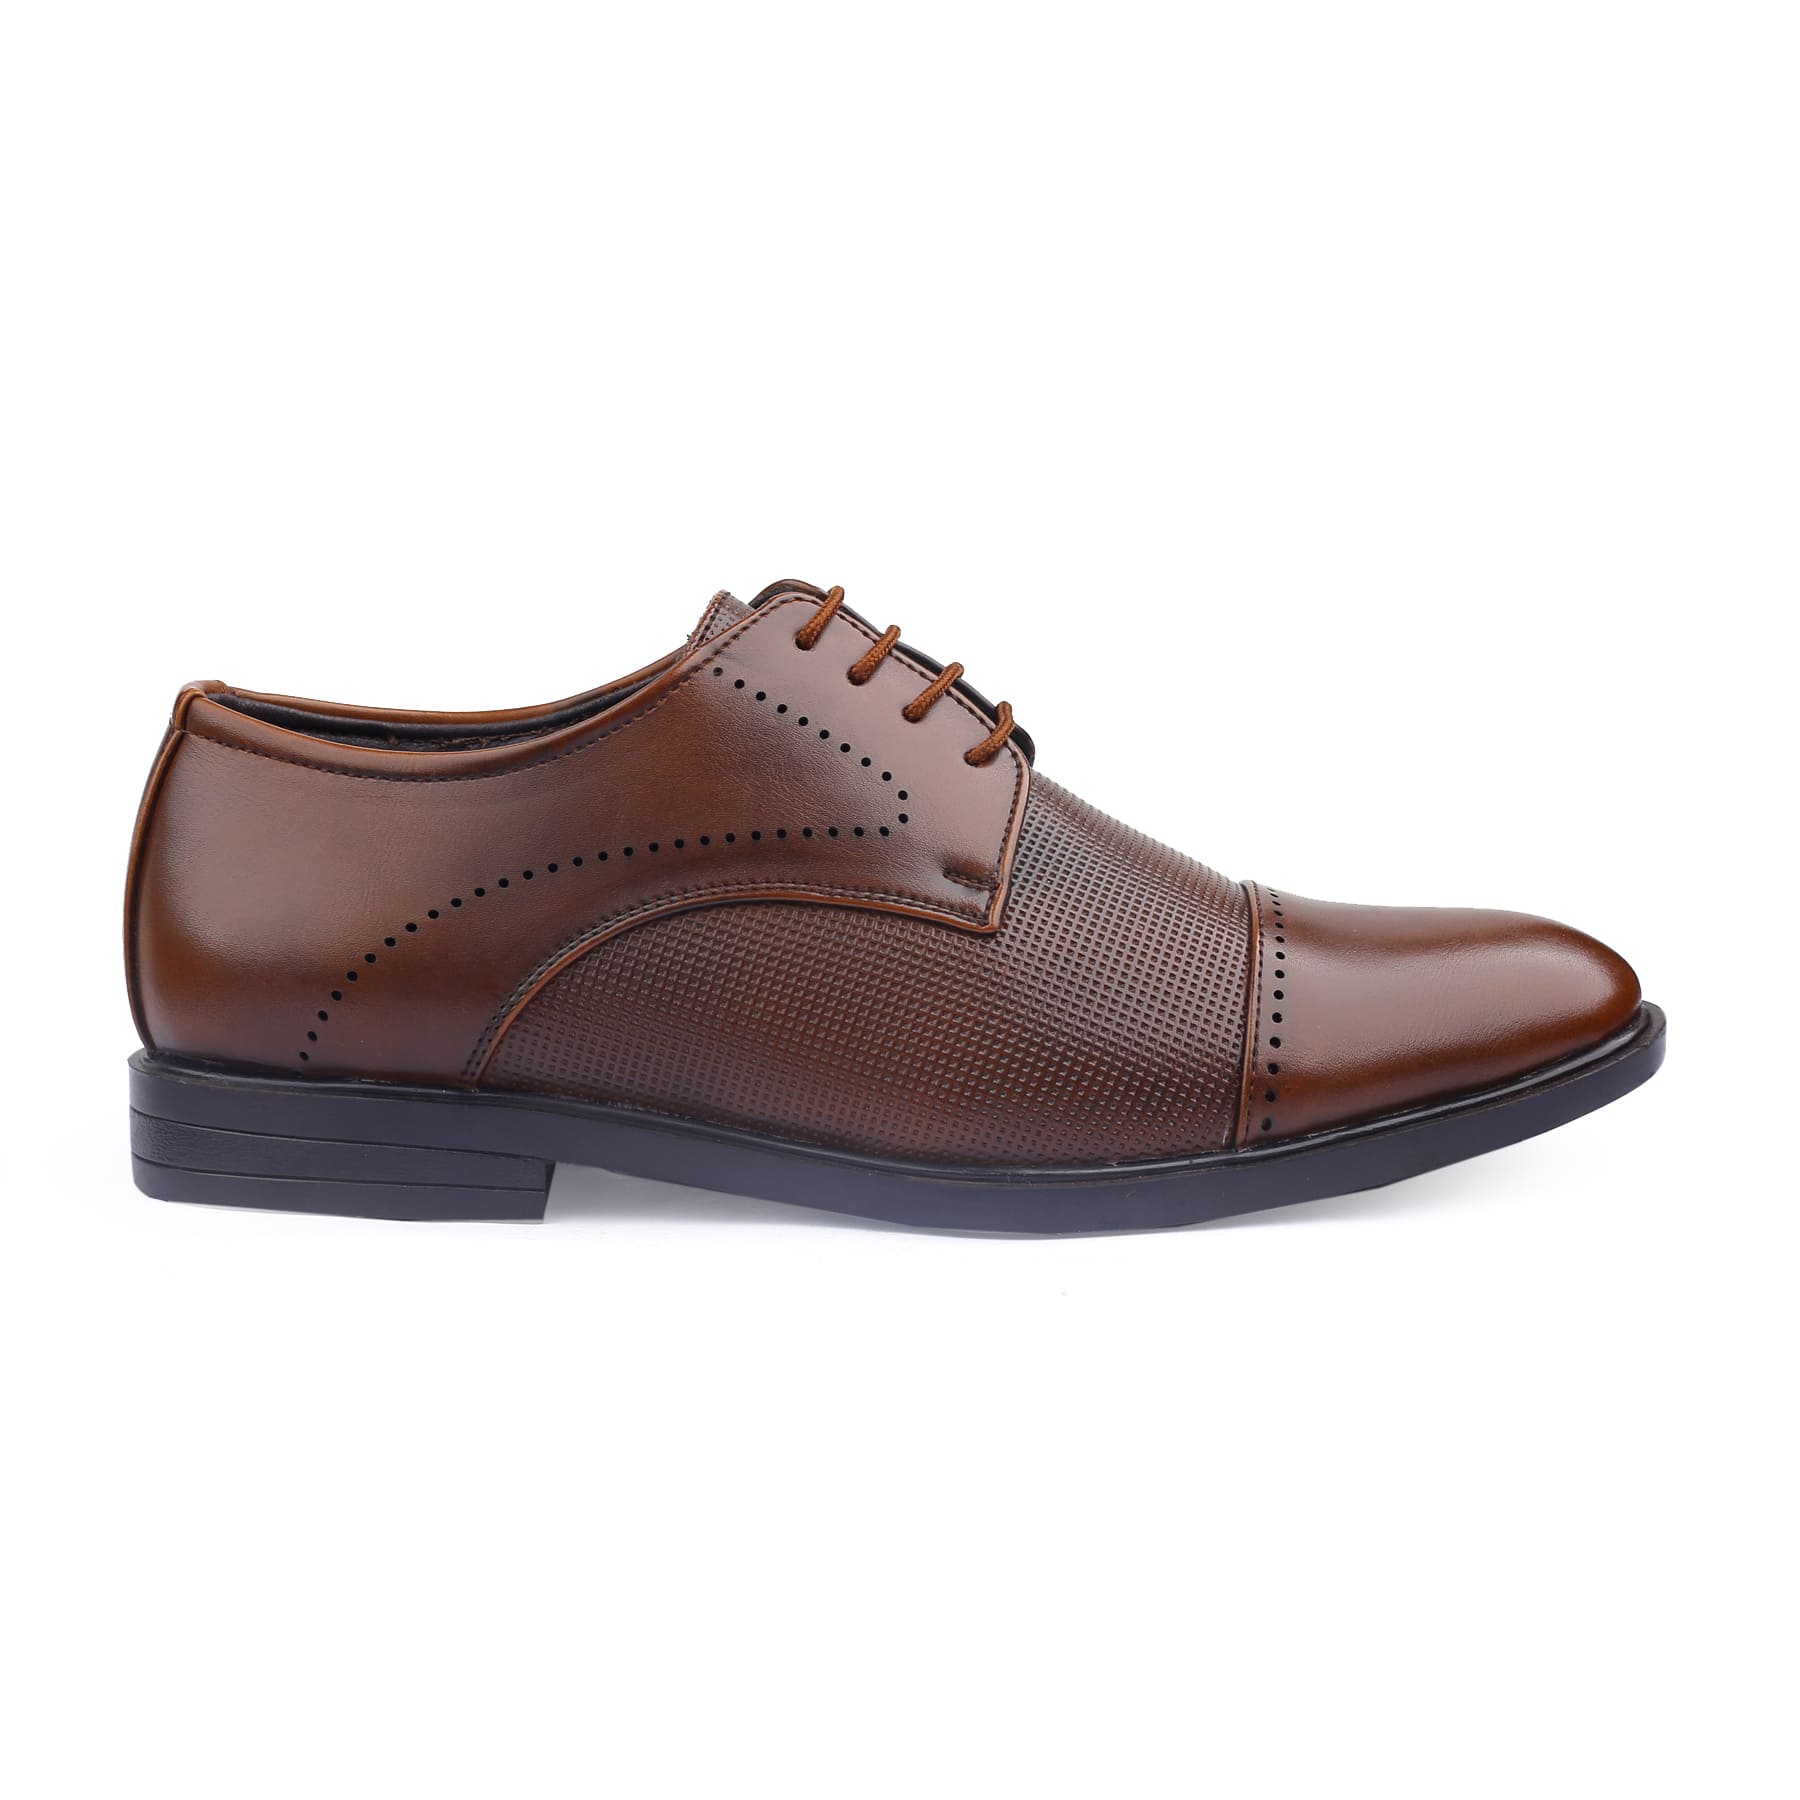 Bacca Bucci WINDSOR Formal Shoes with Superior Comfort | All Day Wear Office Or Party Lace-up Shoes